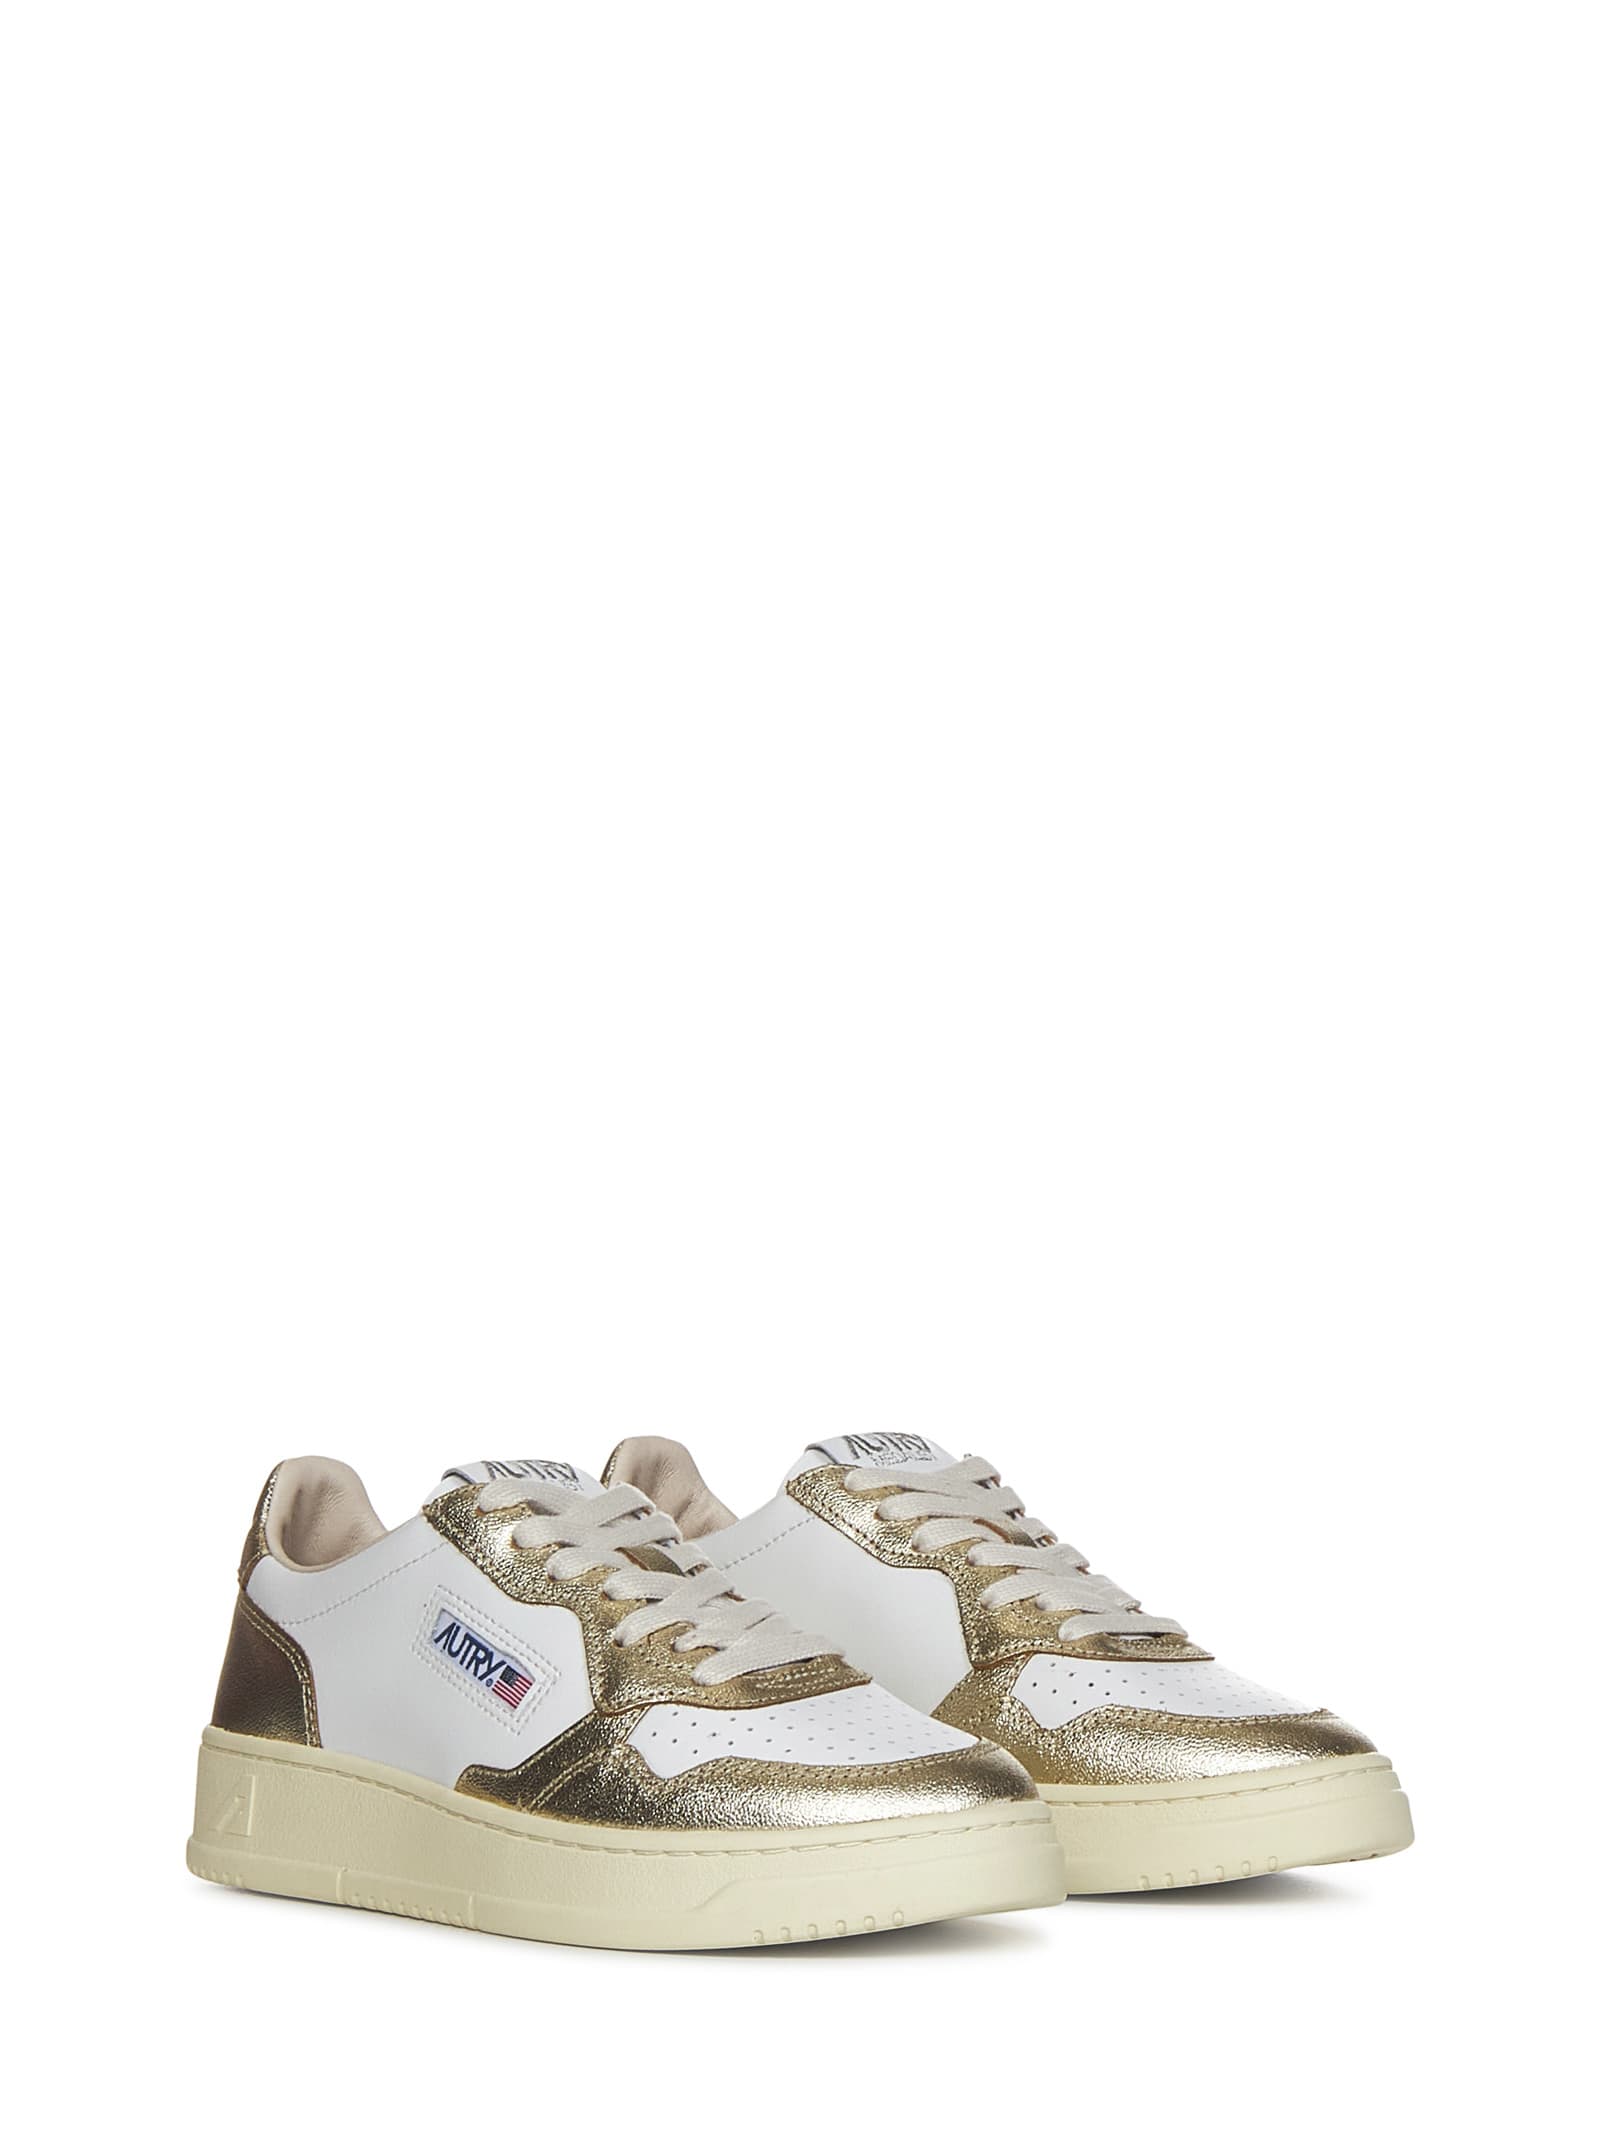 Shop Autry Medalist Low Sneakers In White Platinum